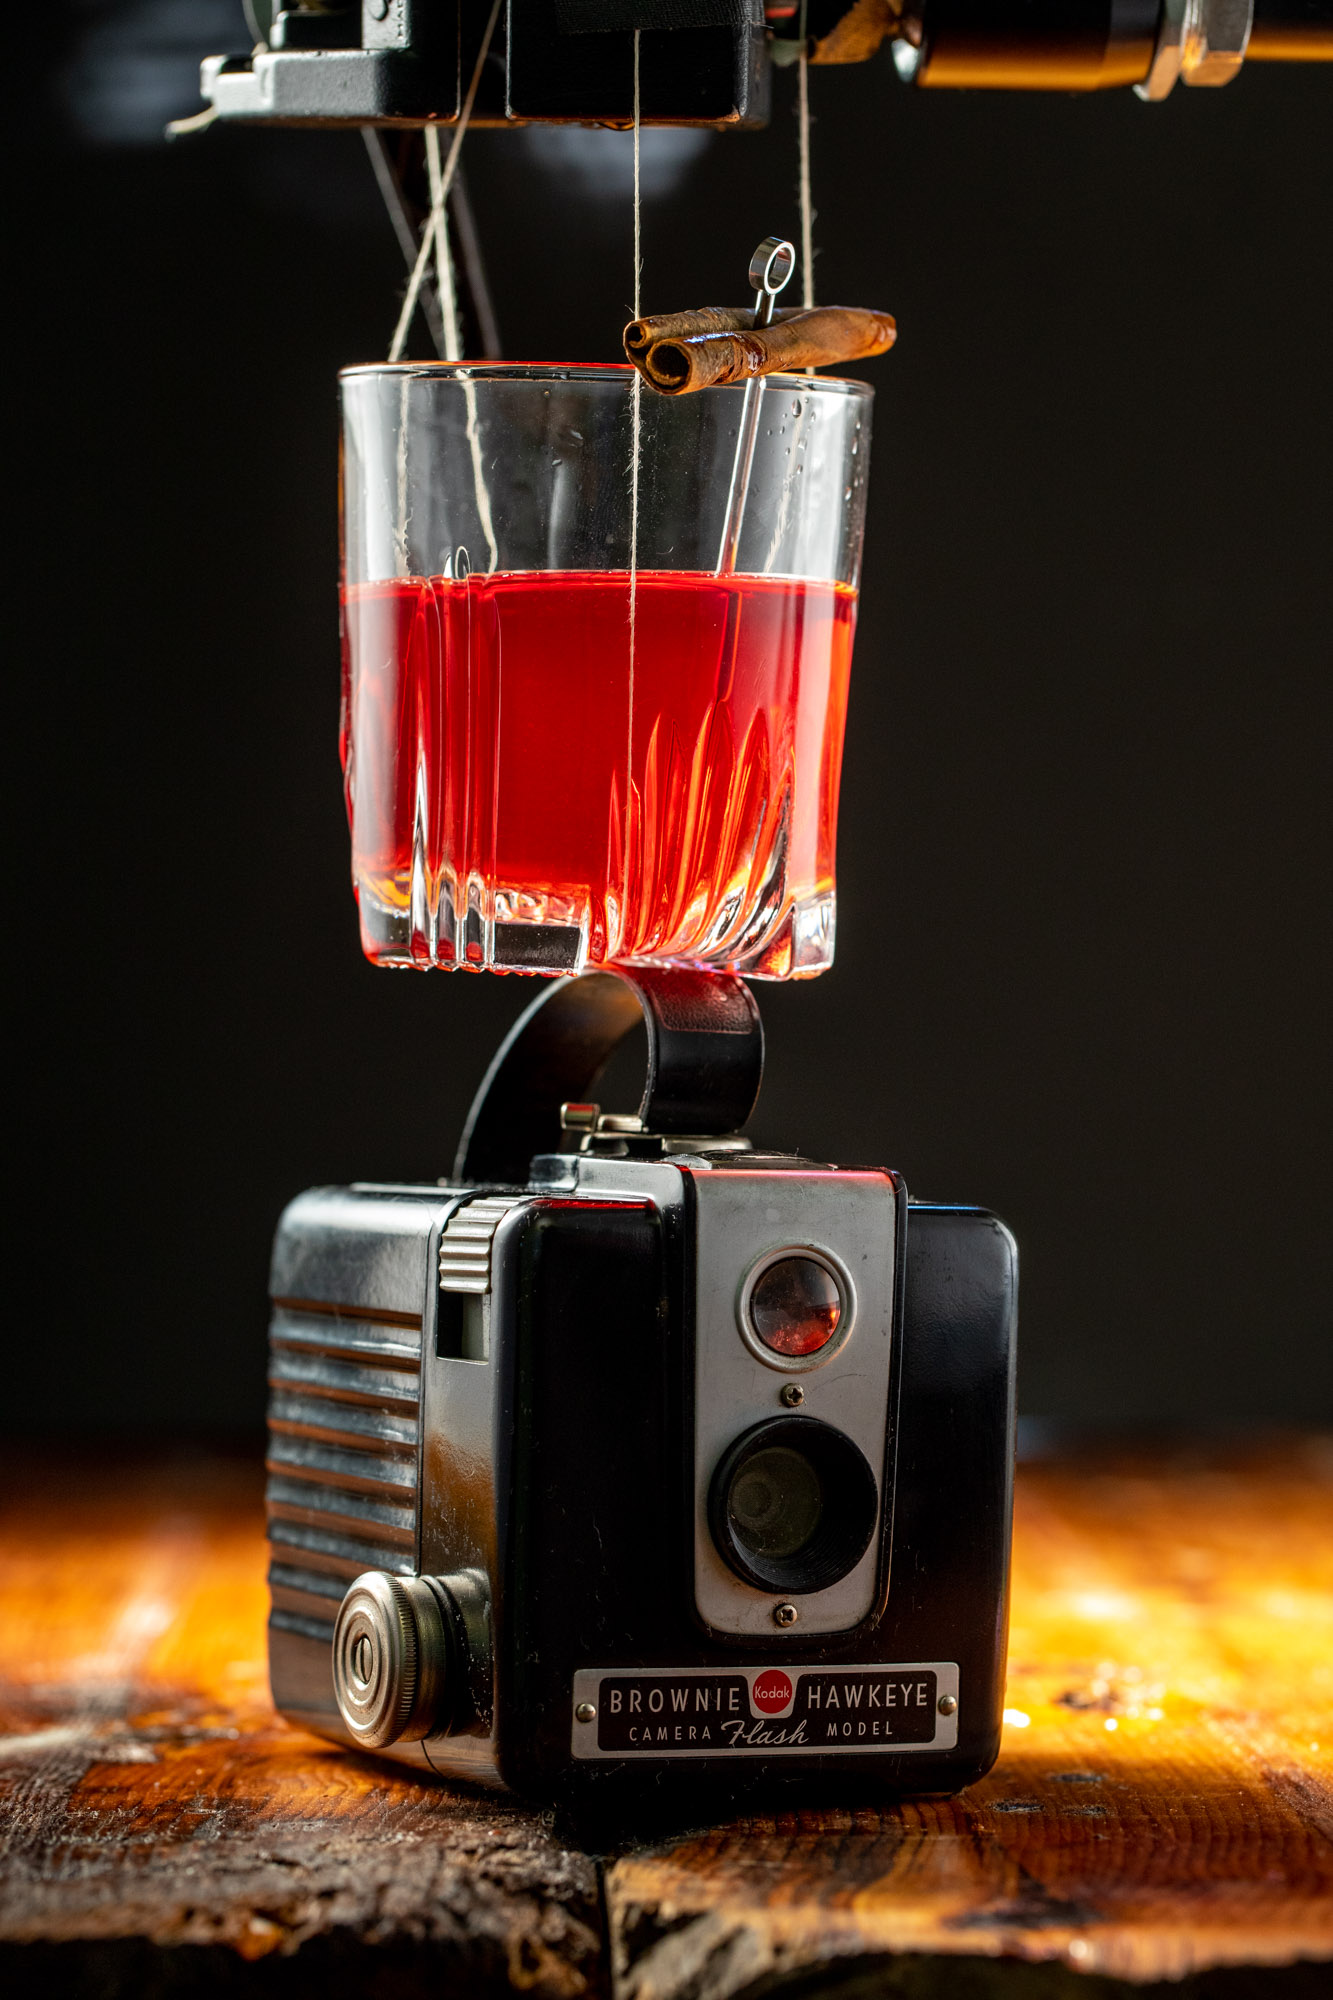 A creative portrait of a cocktail levitating over a camera